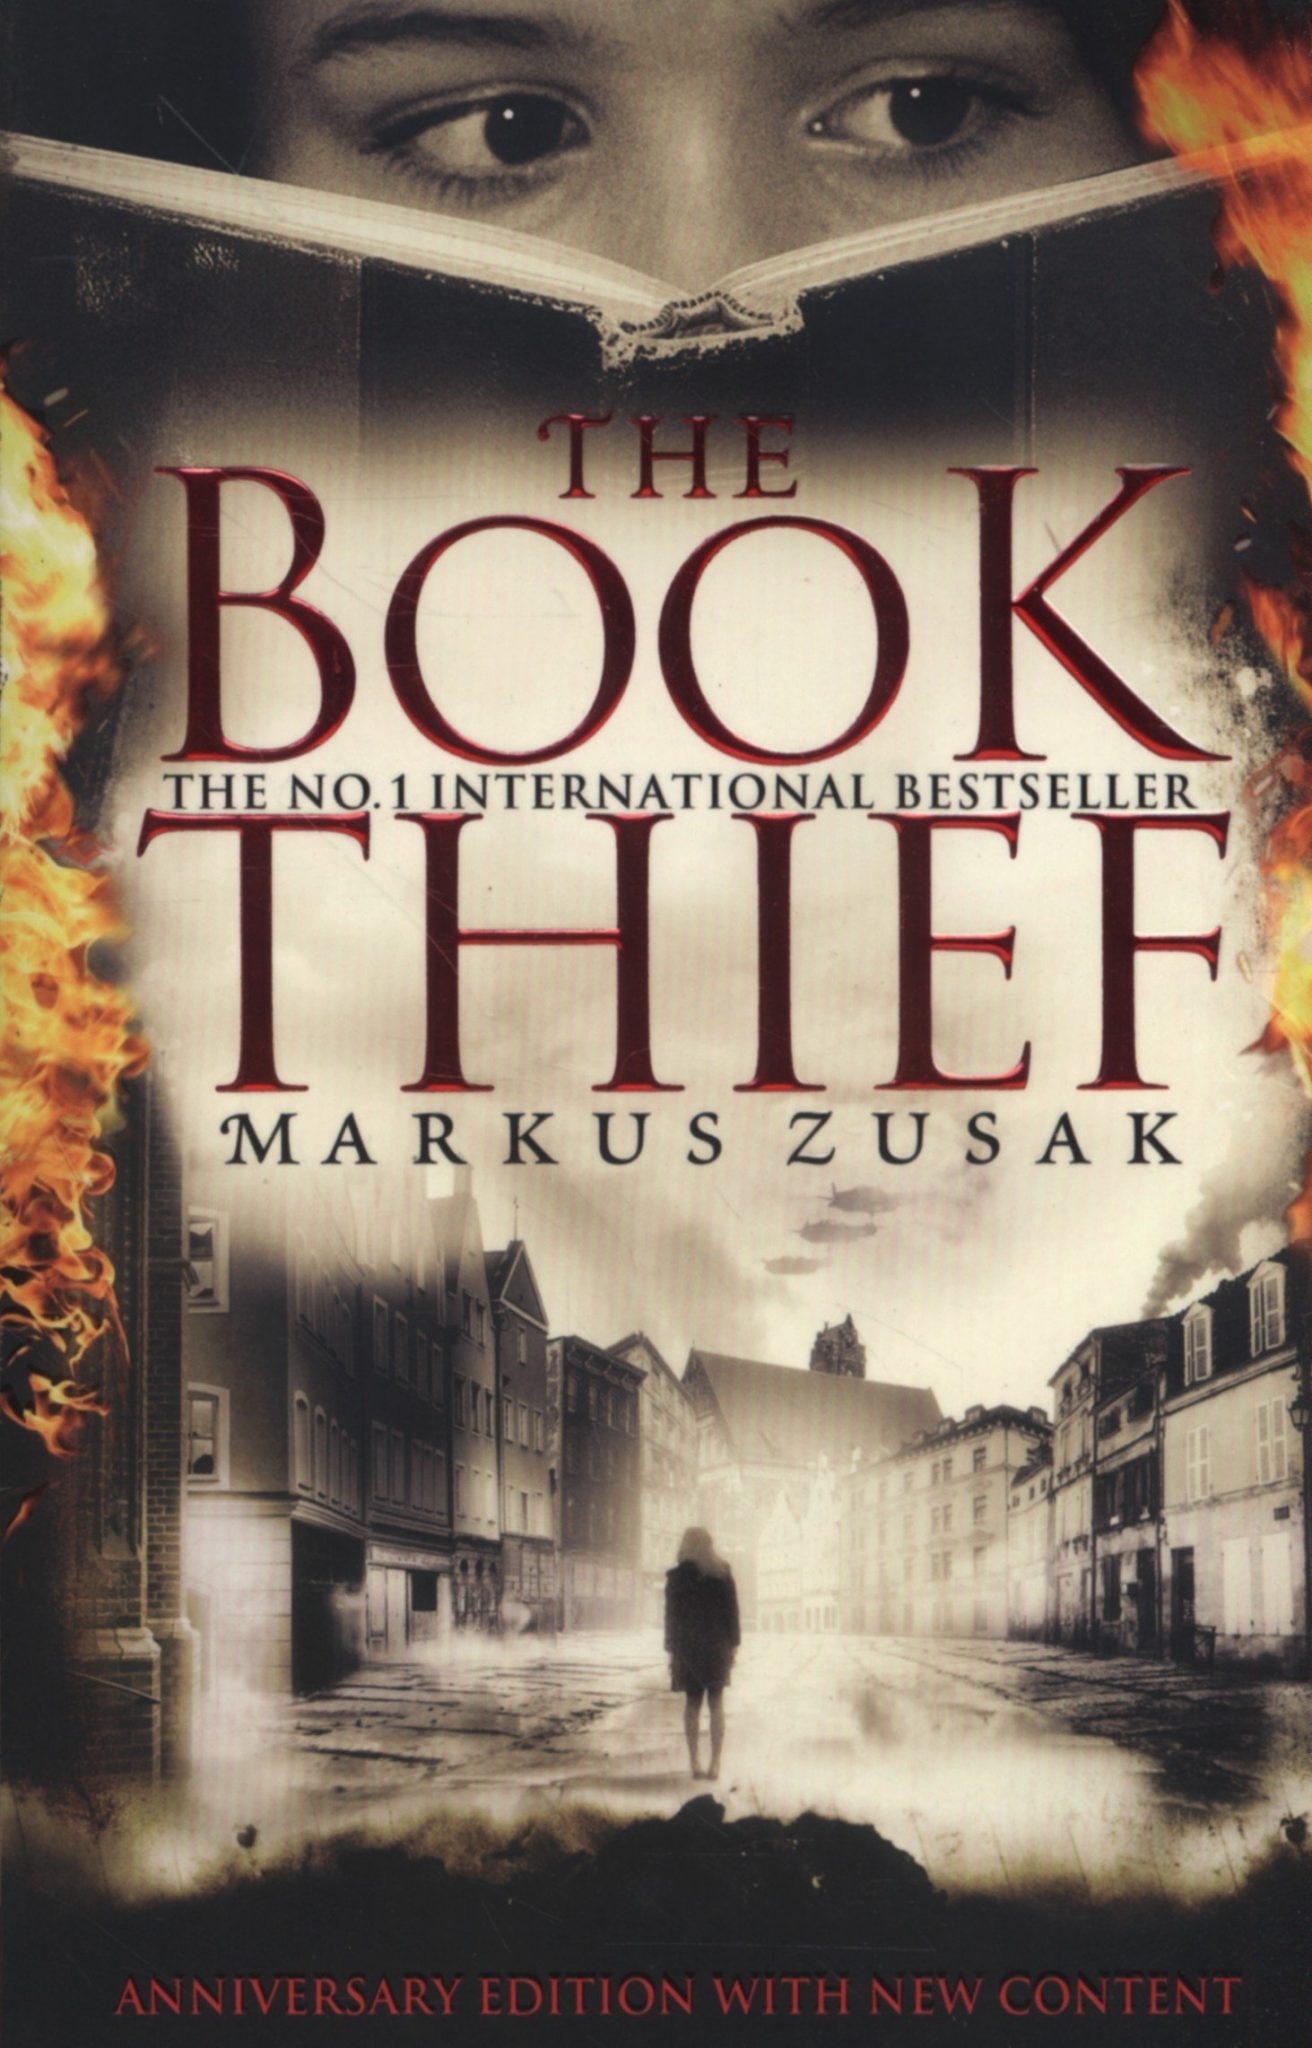 book review of the book thief